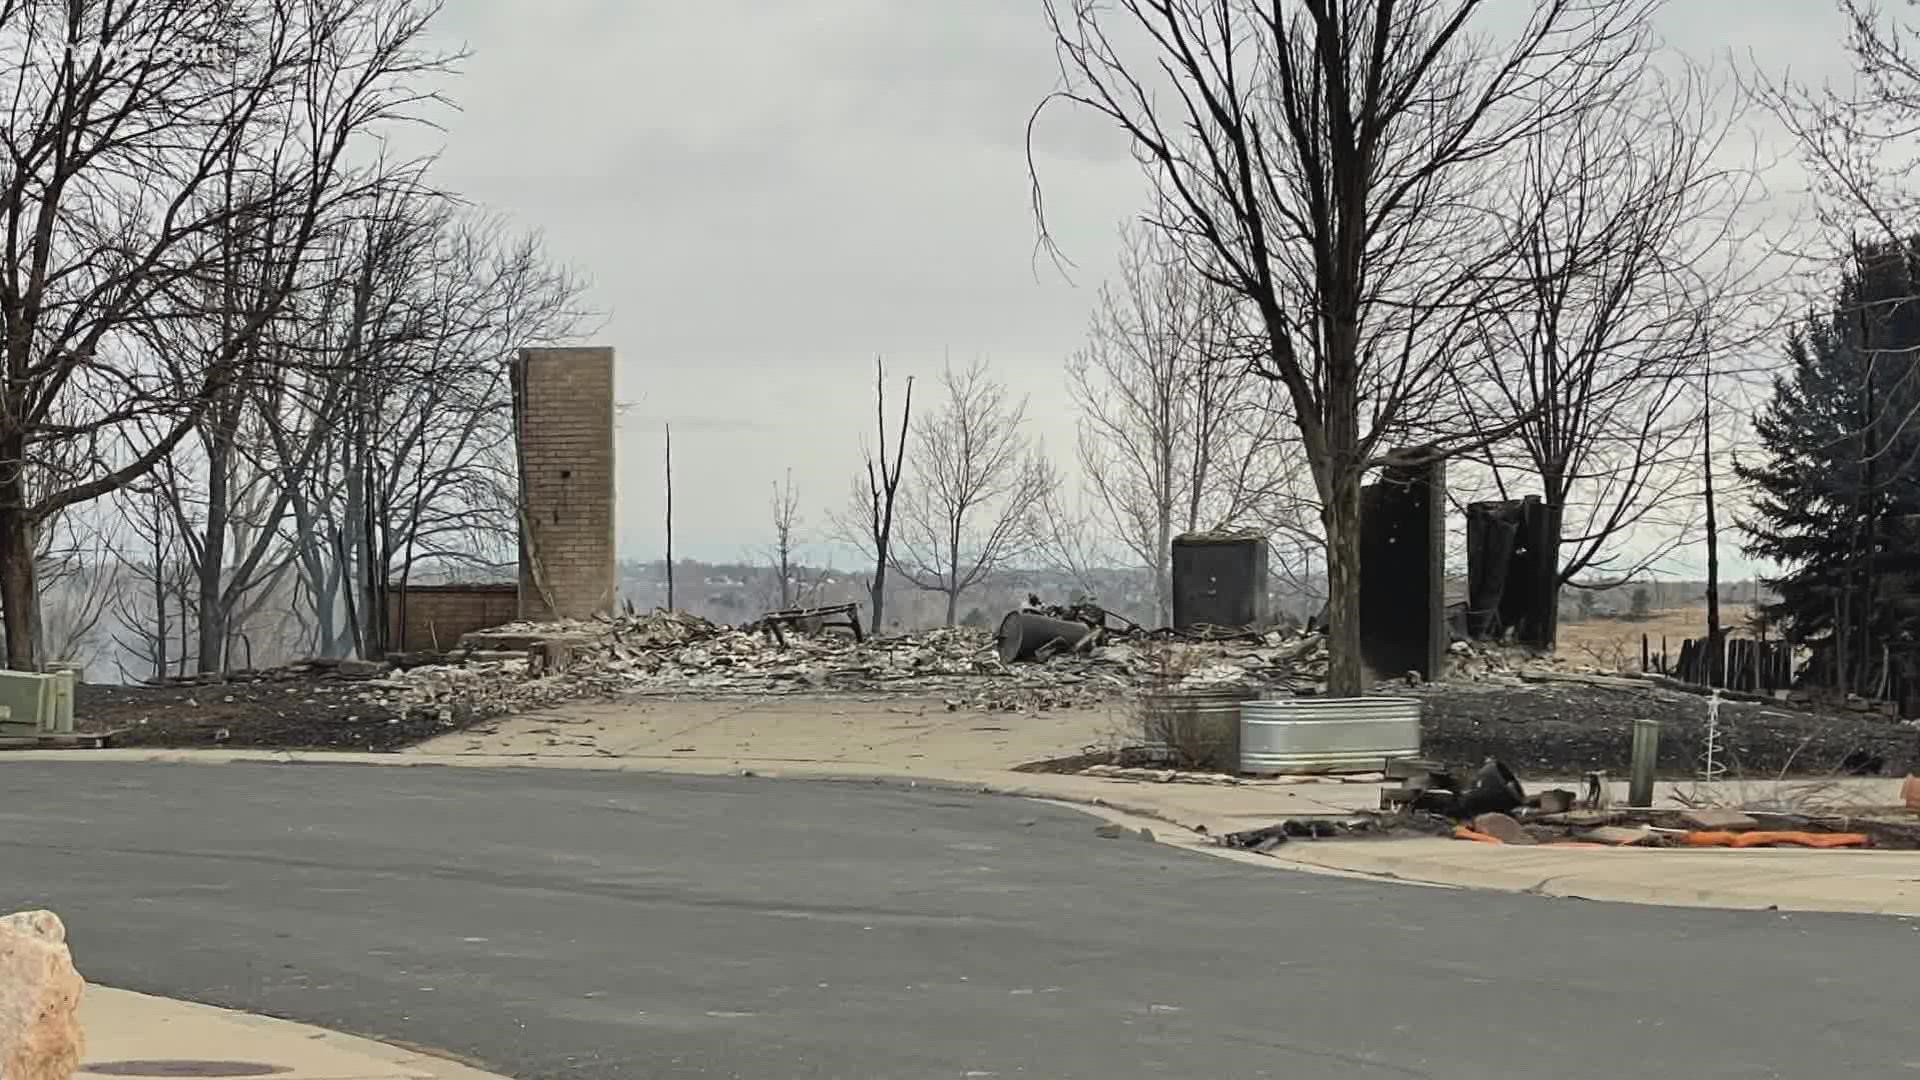 Building codes to make homes "greener" can also cost more for Louisville homeowners to rebuild after losing homes in Marshall Fire.